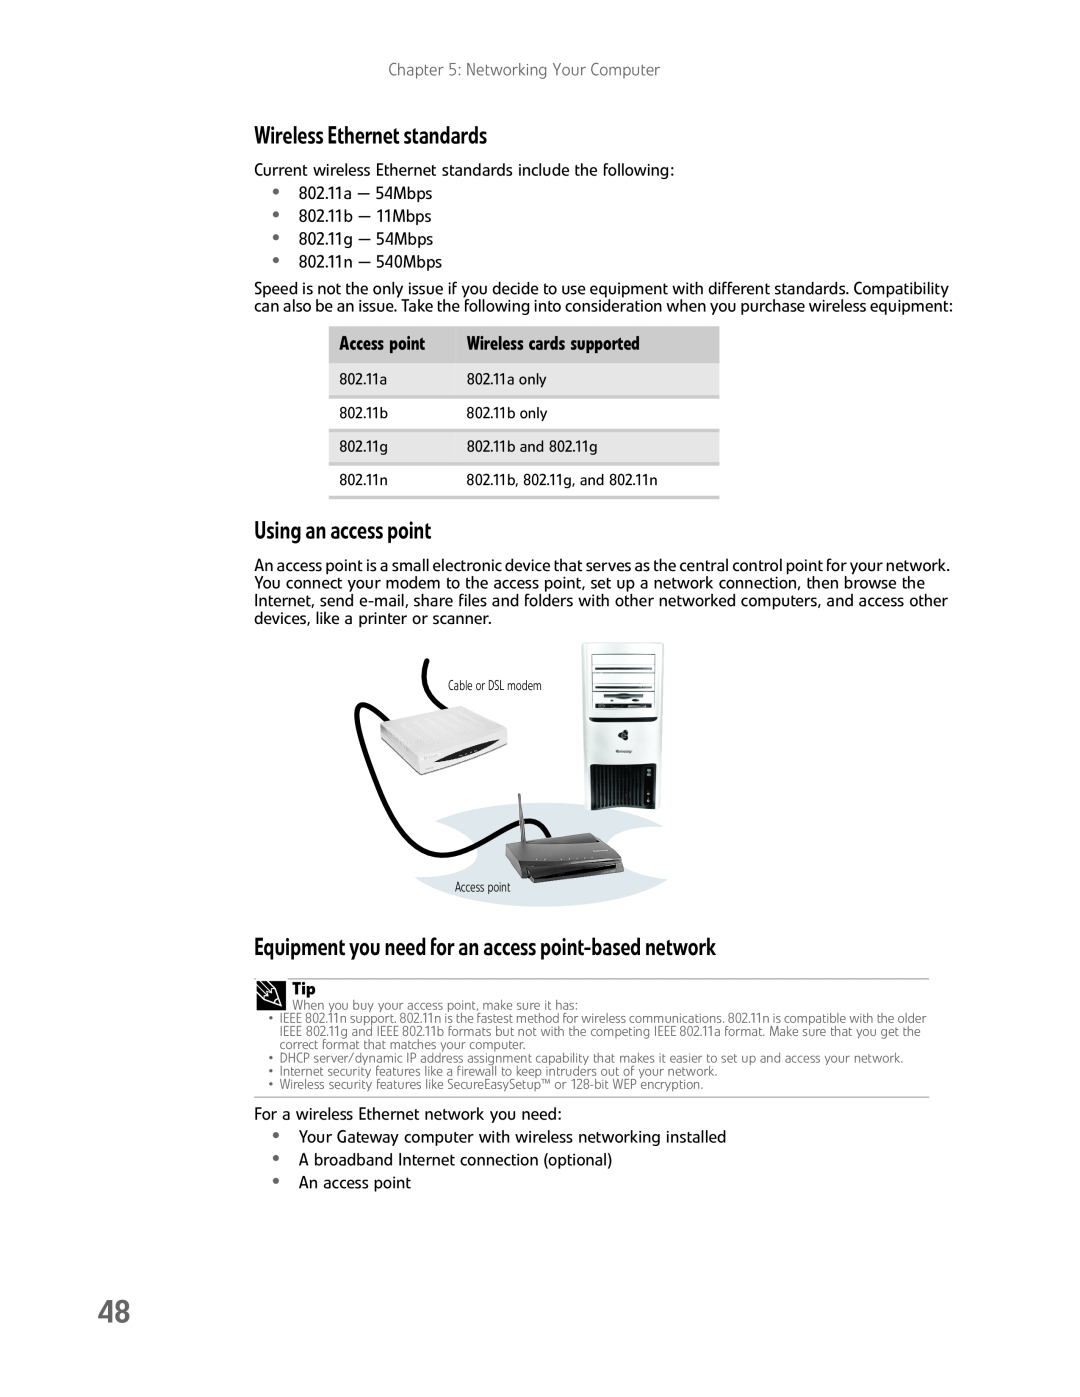 eMachines EL1200 Series manual Wireless Ethernet standards, Using an access point, Access point, Wireless cards supported 